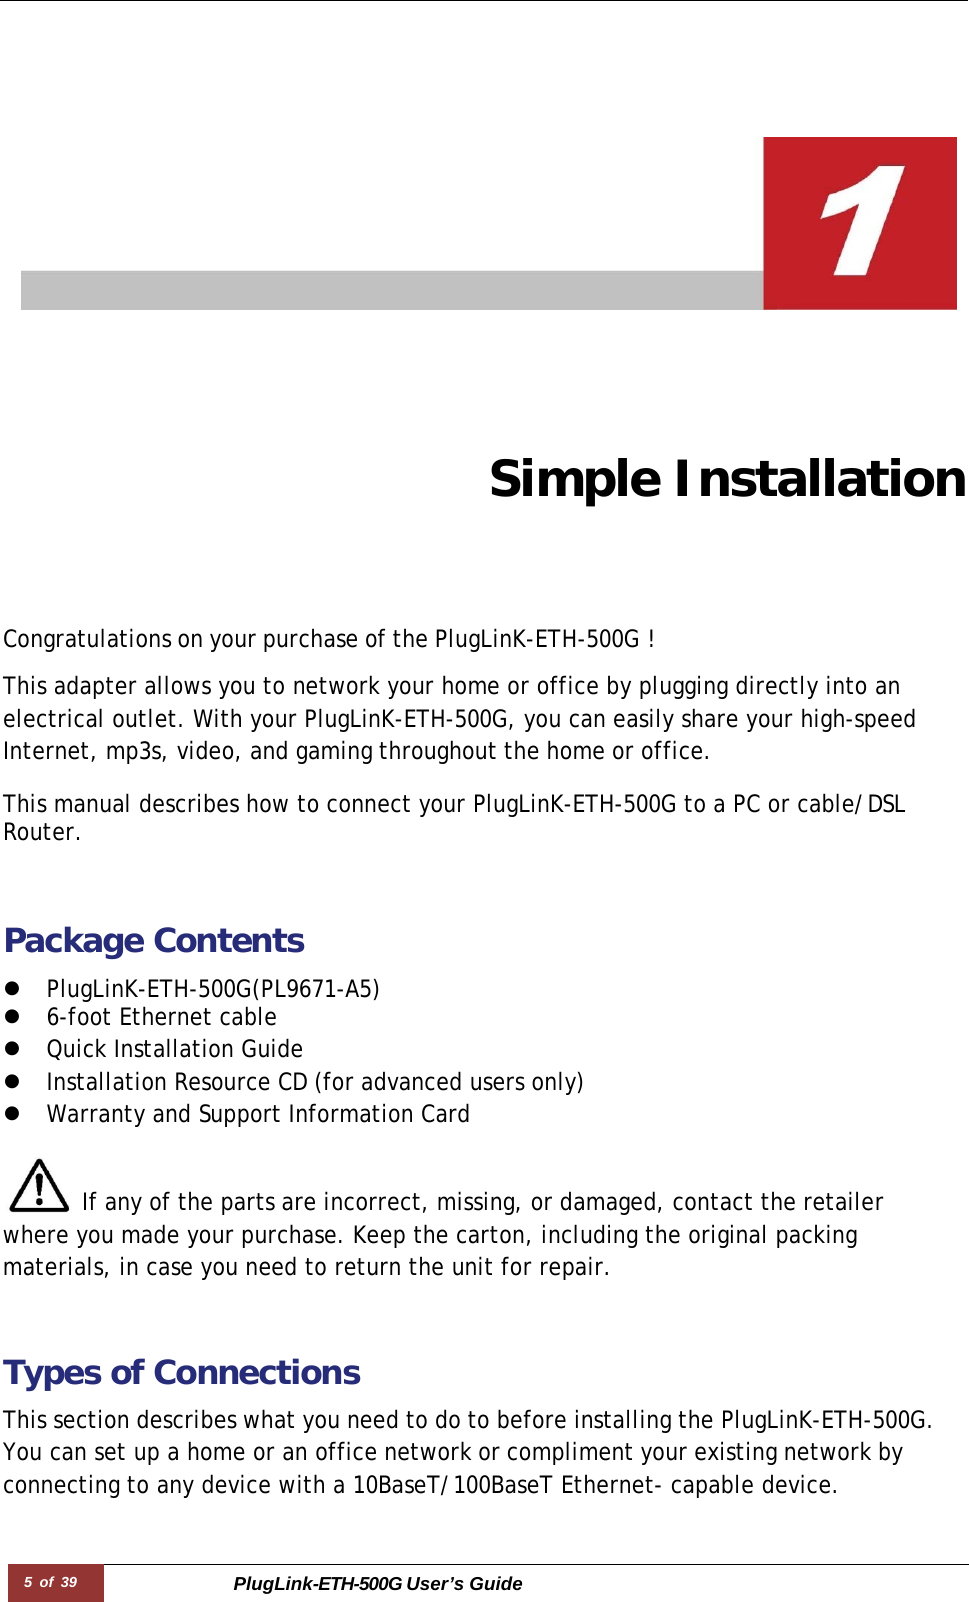 5 of 39 PlugLink-ETH-500G User’s Guide         Simple Installation Congratulations on your purchase of the PlugLinK-ETH-500G !  This adapter allows you to network your home or office by plugging directly into an electrical outlet. With your PlugLinK-ETH-500G, you can easily share your high-speed Internet, mp3s, video, and gaming throughout the home or office.  This manual describes how to connect your PlugLinK-ETH-500G to a PC or cable/DSL Router.   Package Contents  z PlugLinK-ETH-500G(PL9671-A5) z 6-foot Ethernet cable z Quick Installation Guide  z Installation Resource CD (for advanced users only) z Warranty and Support Information Card   If any of the parts are incorrect, missing, or damaged, contact the retailer where you made your purchase. Keep the carton, including the original packing materials, in case you need to return the unit for repair.   Types of Connections  This section describes what you need to do to before installing the PlugLinK-ETH-500G. You can set up a home or an office network or compliment your existing network by connecting to any device with a 10BaseT/100BaseT Ethernet- capable device. 